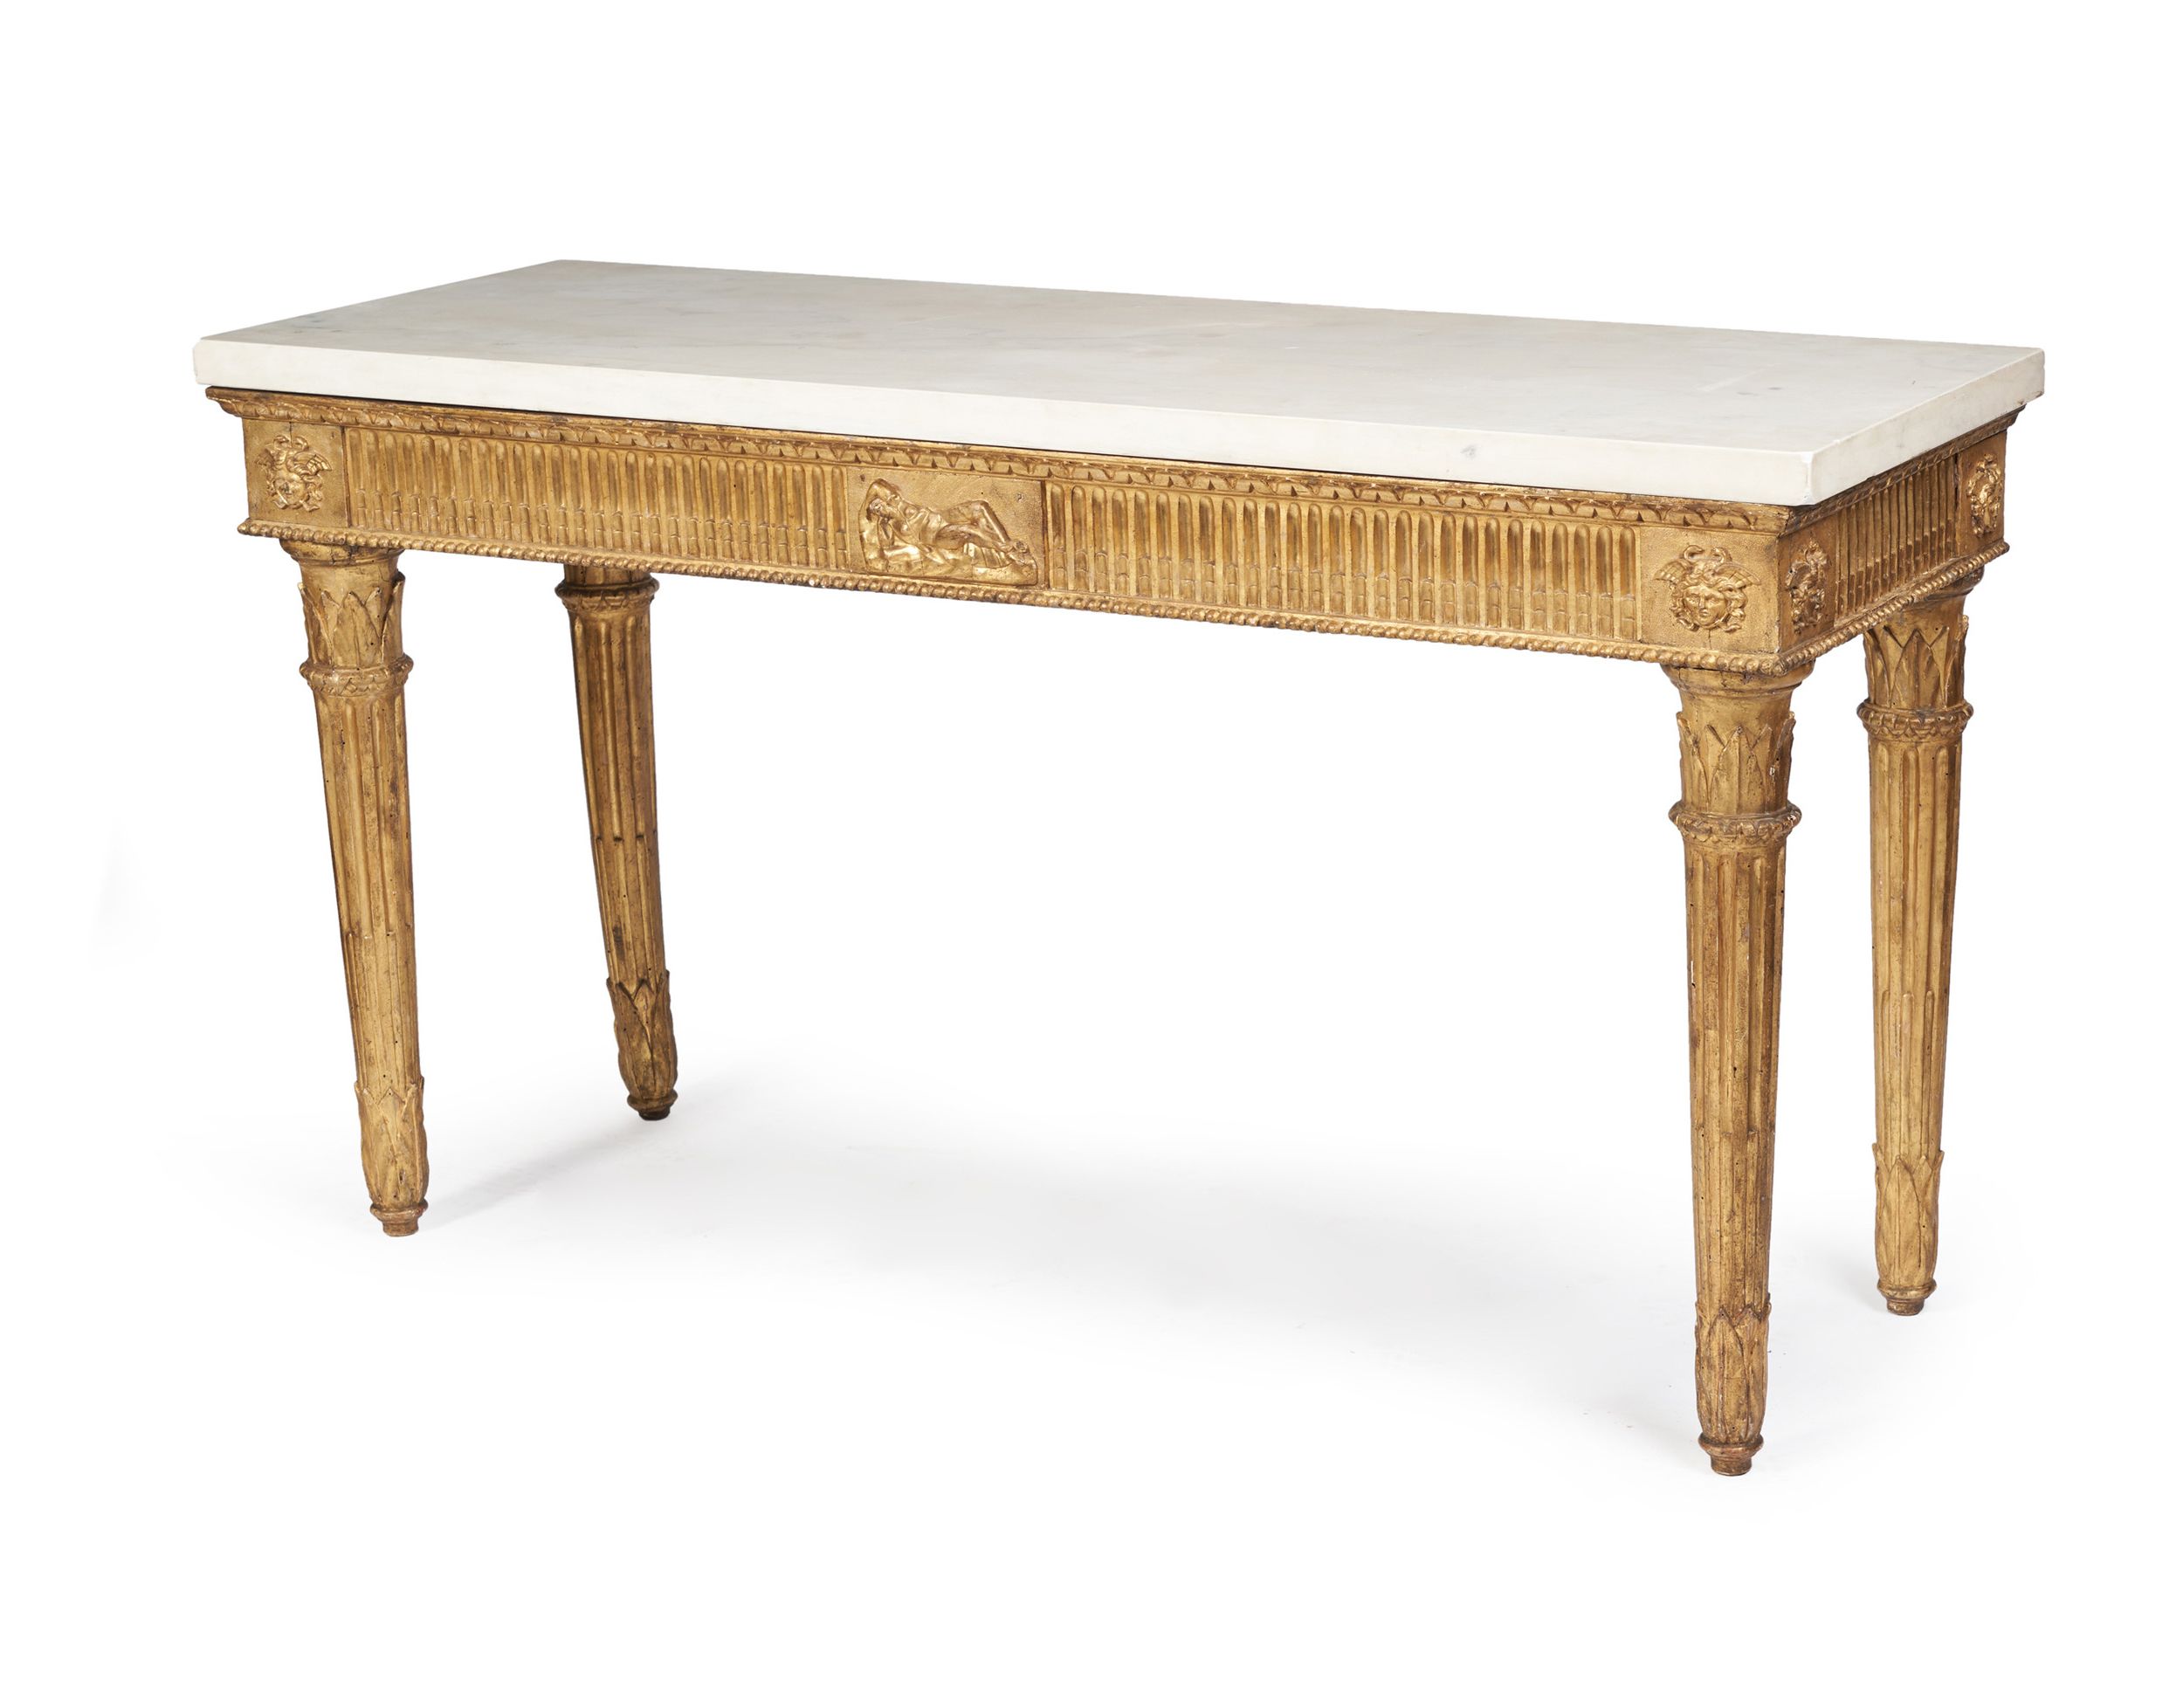 Antique Gilt Console Table For Most Recent Antique Blue Gold Console Tables (View 1 of 10)